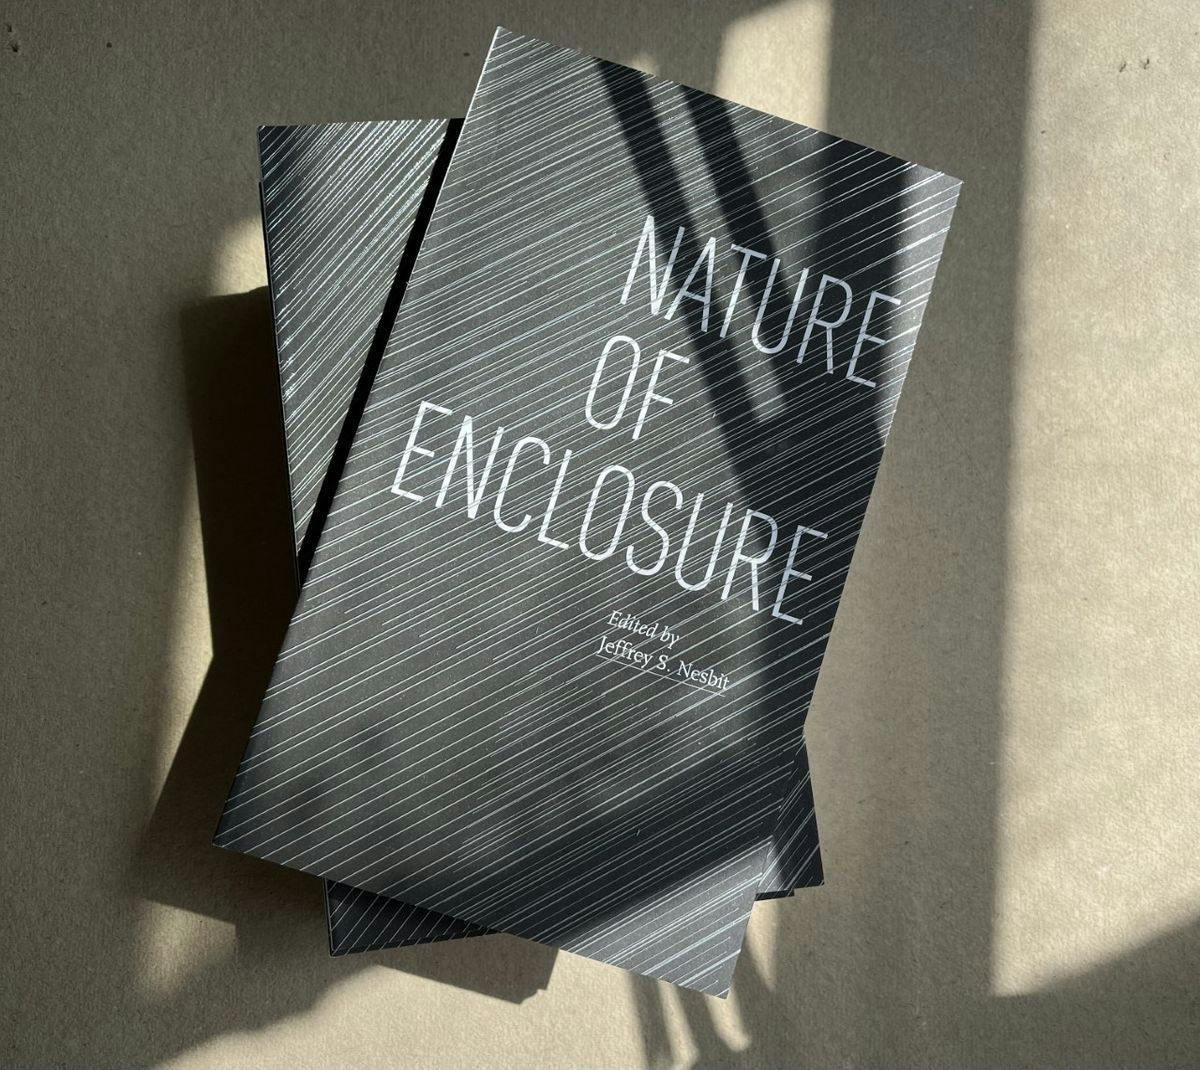 Chapter title:

'Astropolis, Aquapolis, Aeropolis: Capital’s Enclosure'

Nature of Enclosure is a series of conversations to gather experts from a range of disciplines, including architects, landscape architects, architectural historians, design theory scholars, geographers, historians of science and technology, and professionals at the intersection of architecture and the environment. Organized in three parts, (1) Nature of the Synthetic Environment, (2) Air, Capital and the Planetary Imaginary, and (3) Enclosed Boundaries of Political Geographies, this book continues the conversation with a collection of essays as both reflections from the provocative discussions and expanding the discourse of enclosed environments in architecture and design fields.